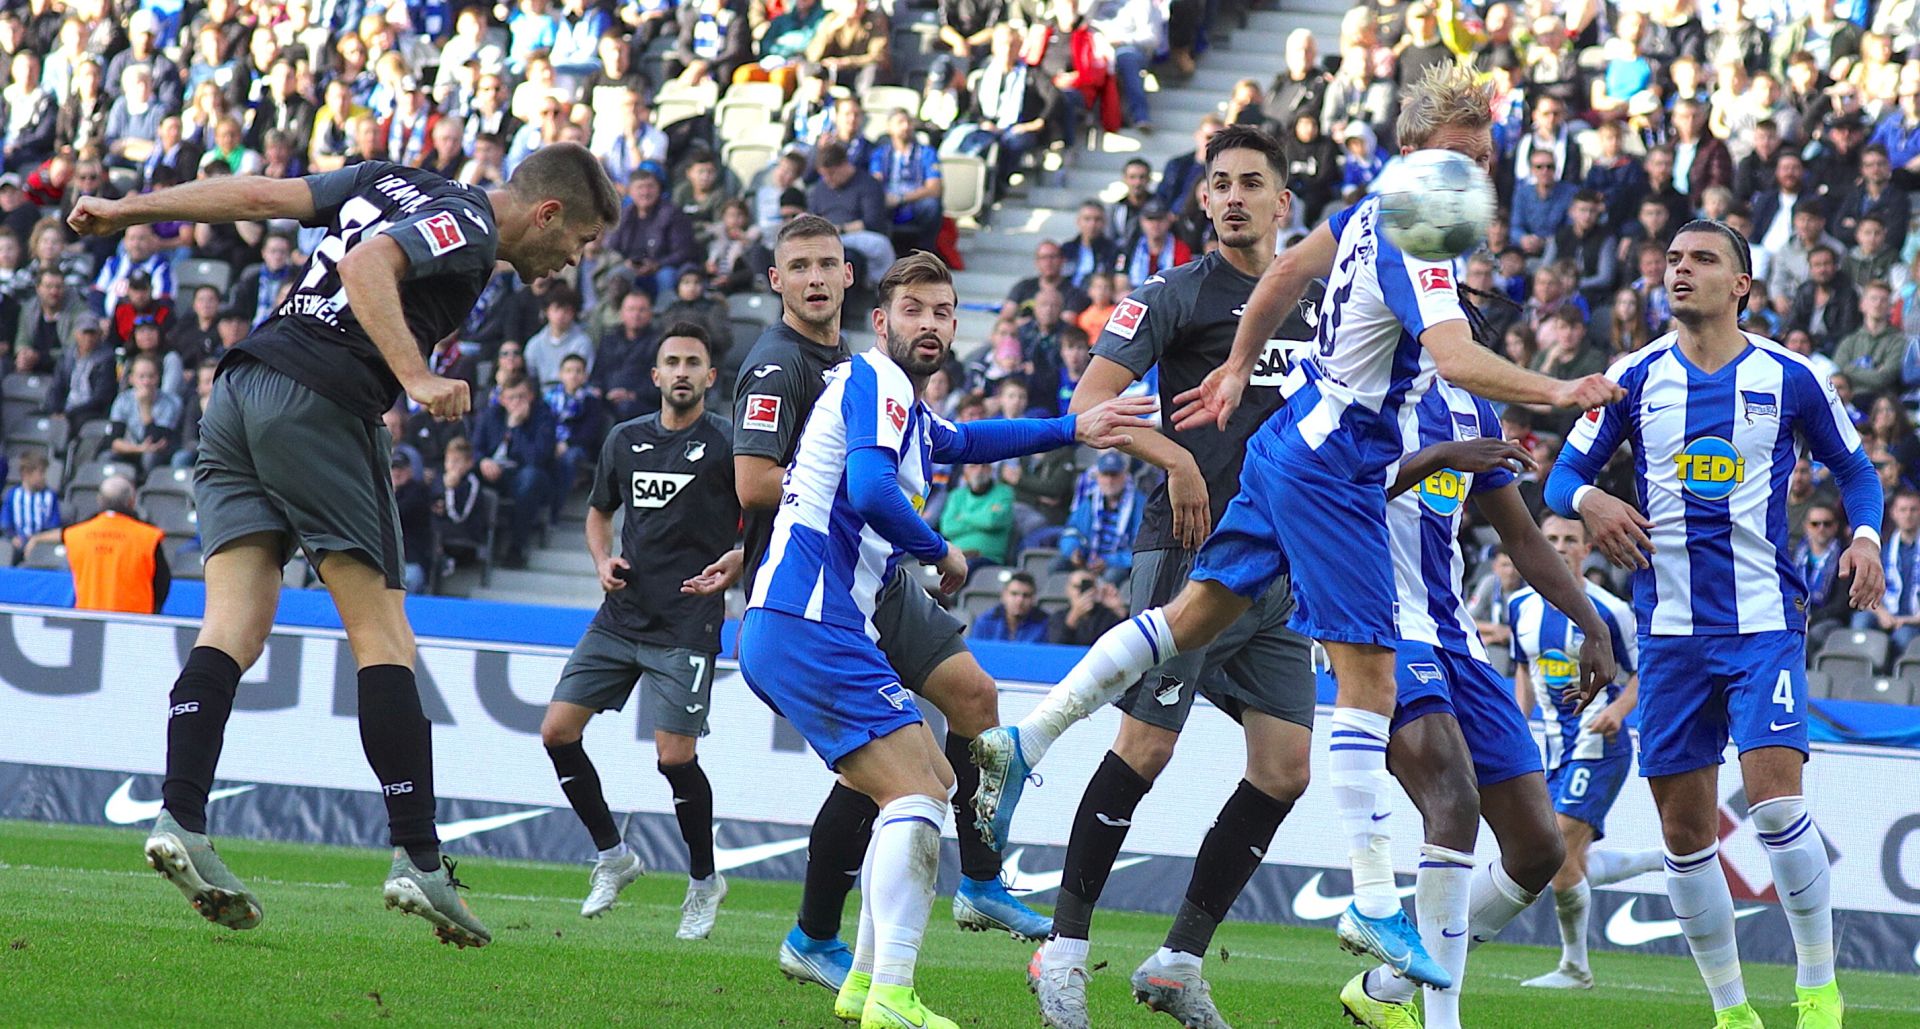 epa07951429 Hoffenheim's Andrej Kramaric (L) scores the second goal during the German Bundesliga soccer match between Hertha BSC and TSG 1899 Hoffenheim in Berlin, Germany, 26 October 2019.  EPA/OMER MESSINGER CONDITIONS - ATTENTION: The DFL regulations prohibit any use of photographs as image sequences and/or quasi-video.